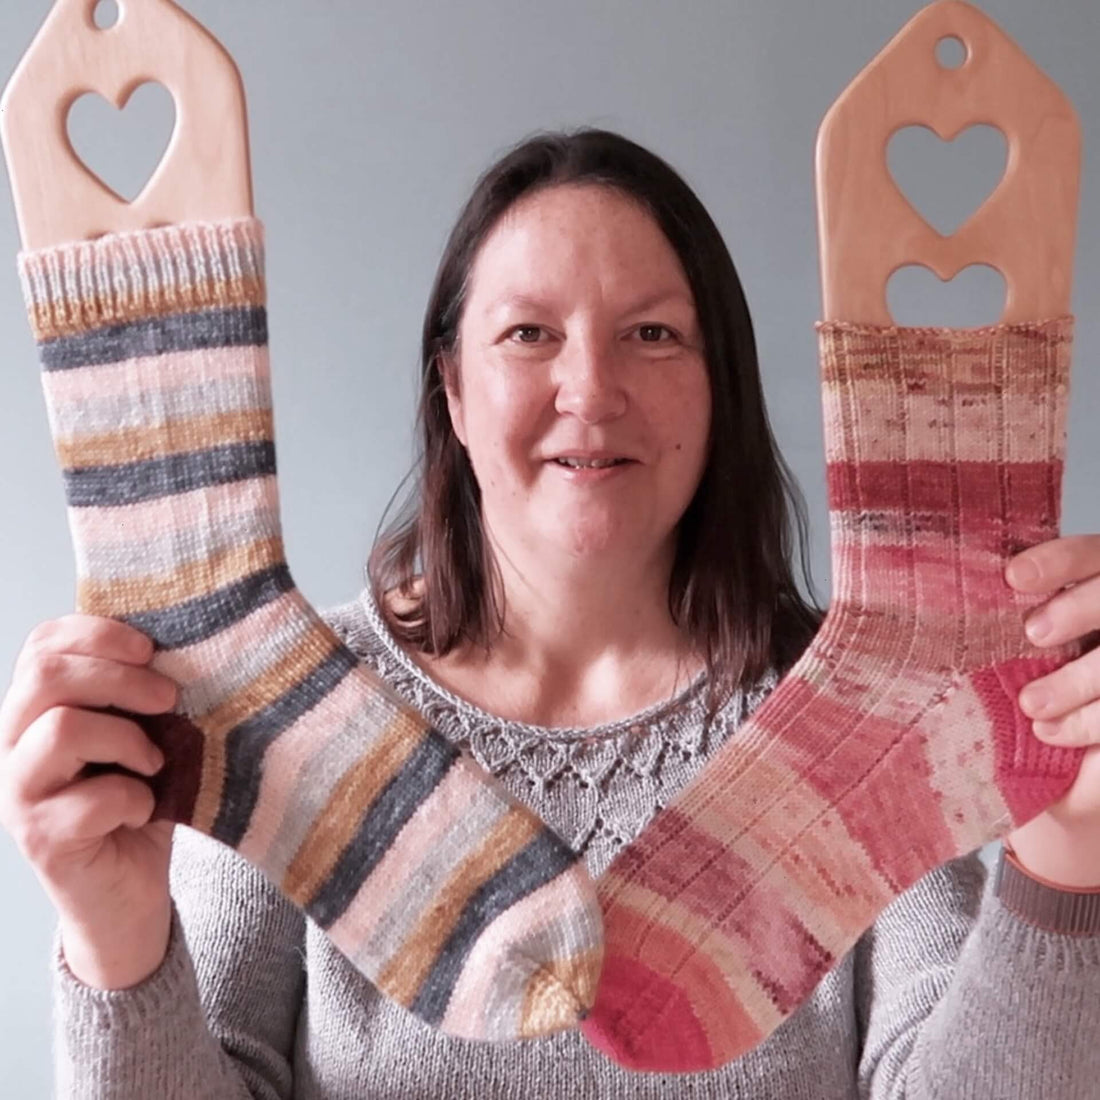 Emma, the host of the Eldenwood Craft podcast, shows two finished handknit socks she's been working on. Both are striped - one is blue based and the other is very pink!